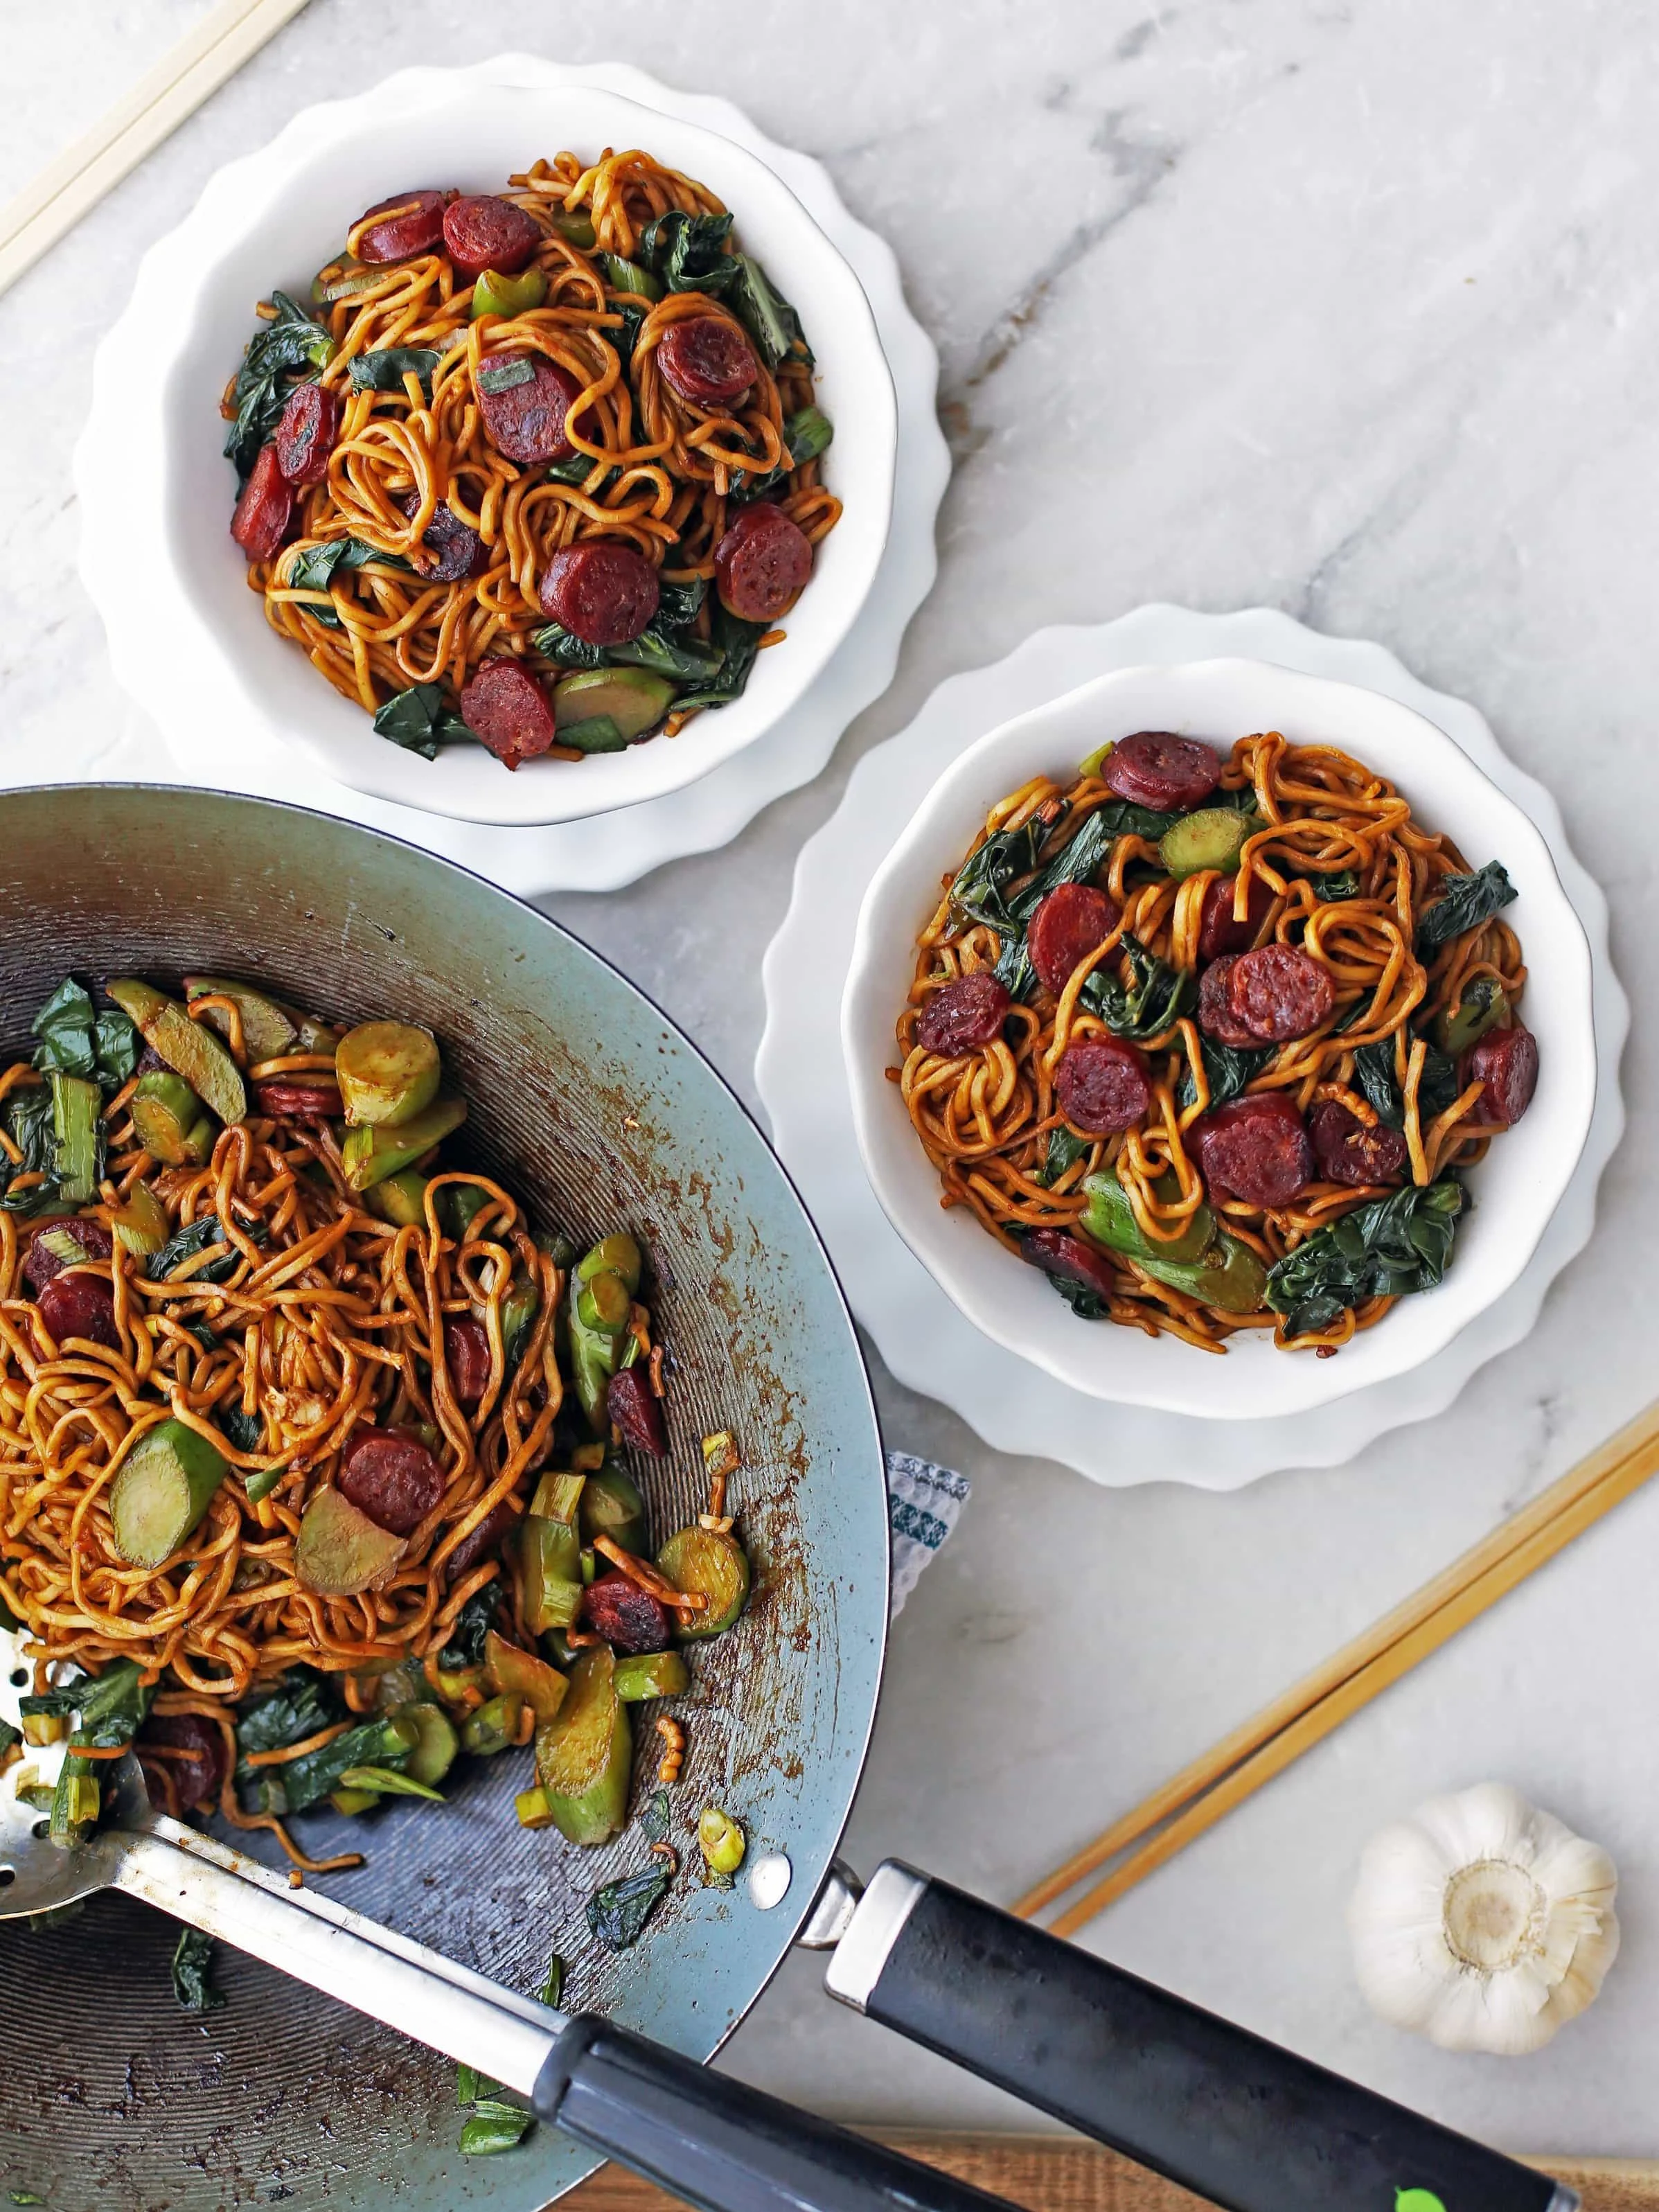 Two bowls of Lo mein noodles with Chinese sausage and gai lan and more in a large wok.